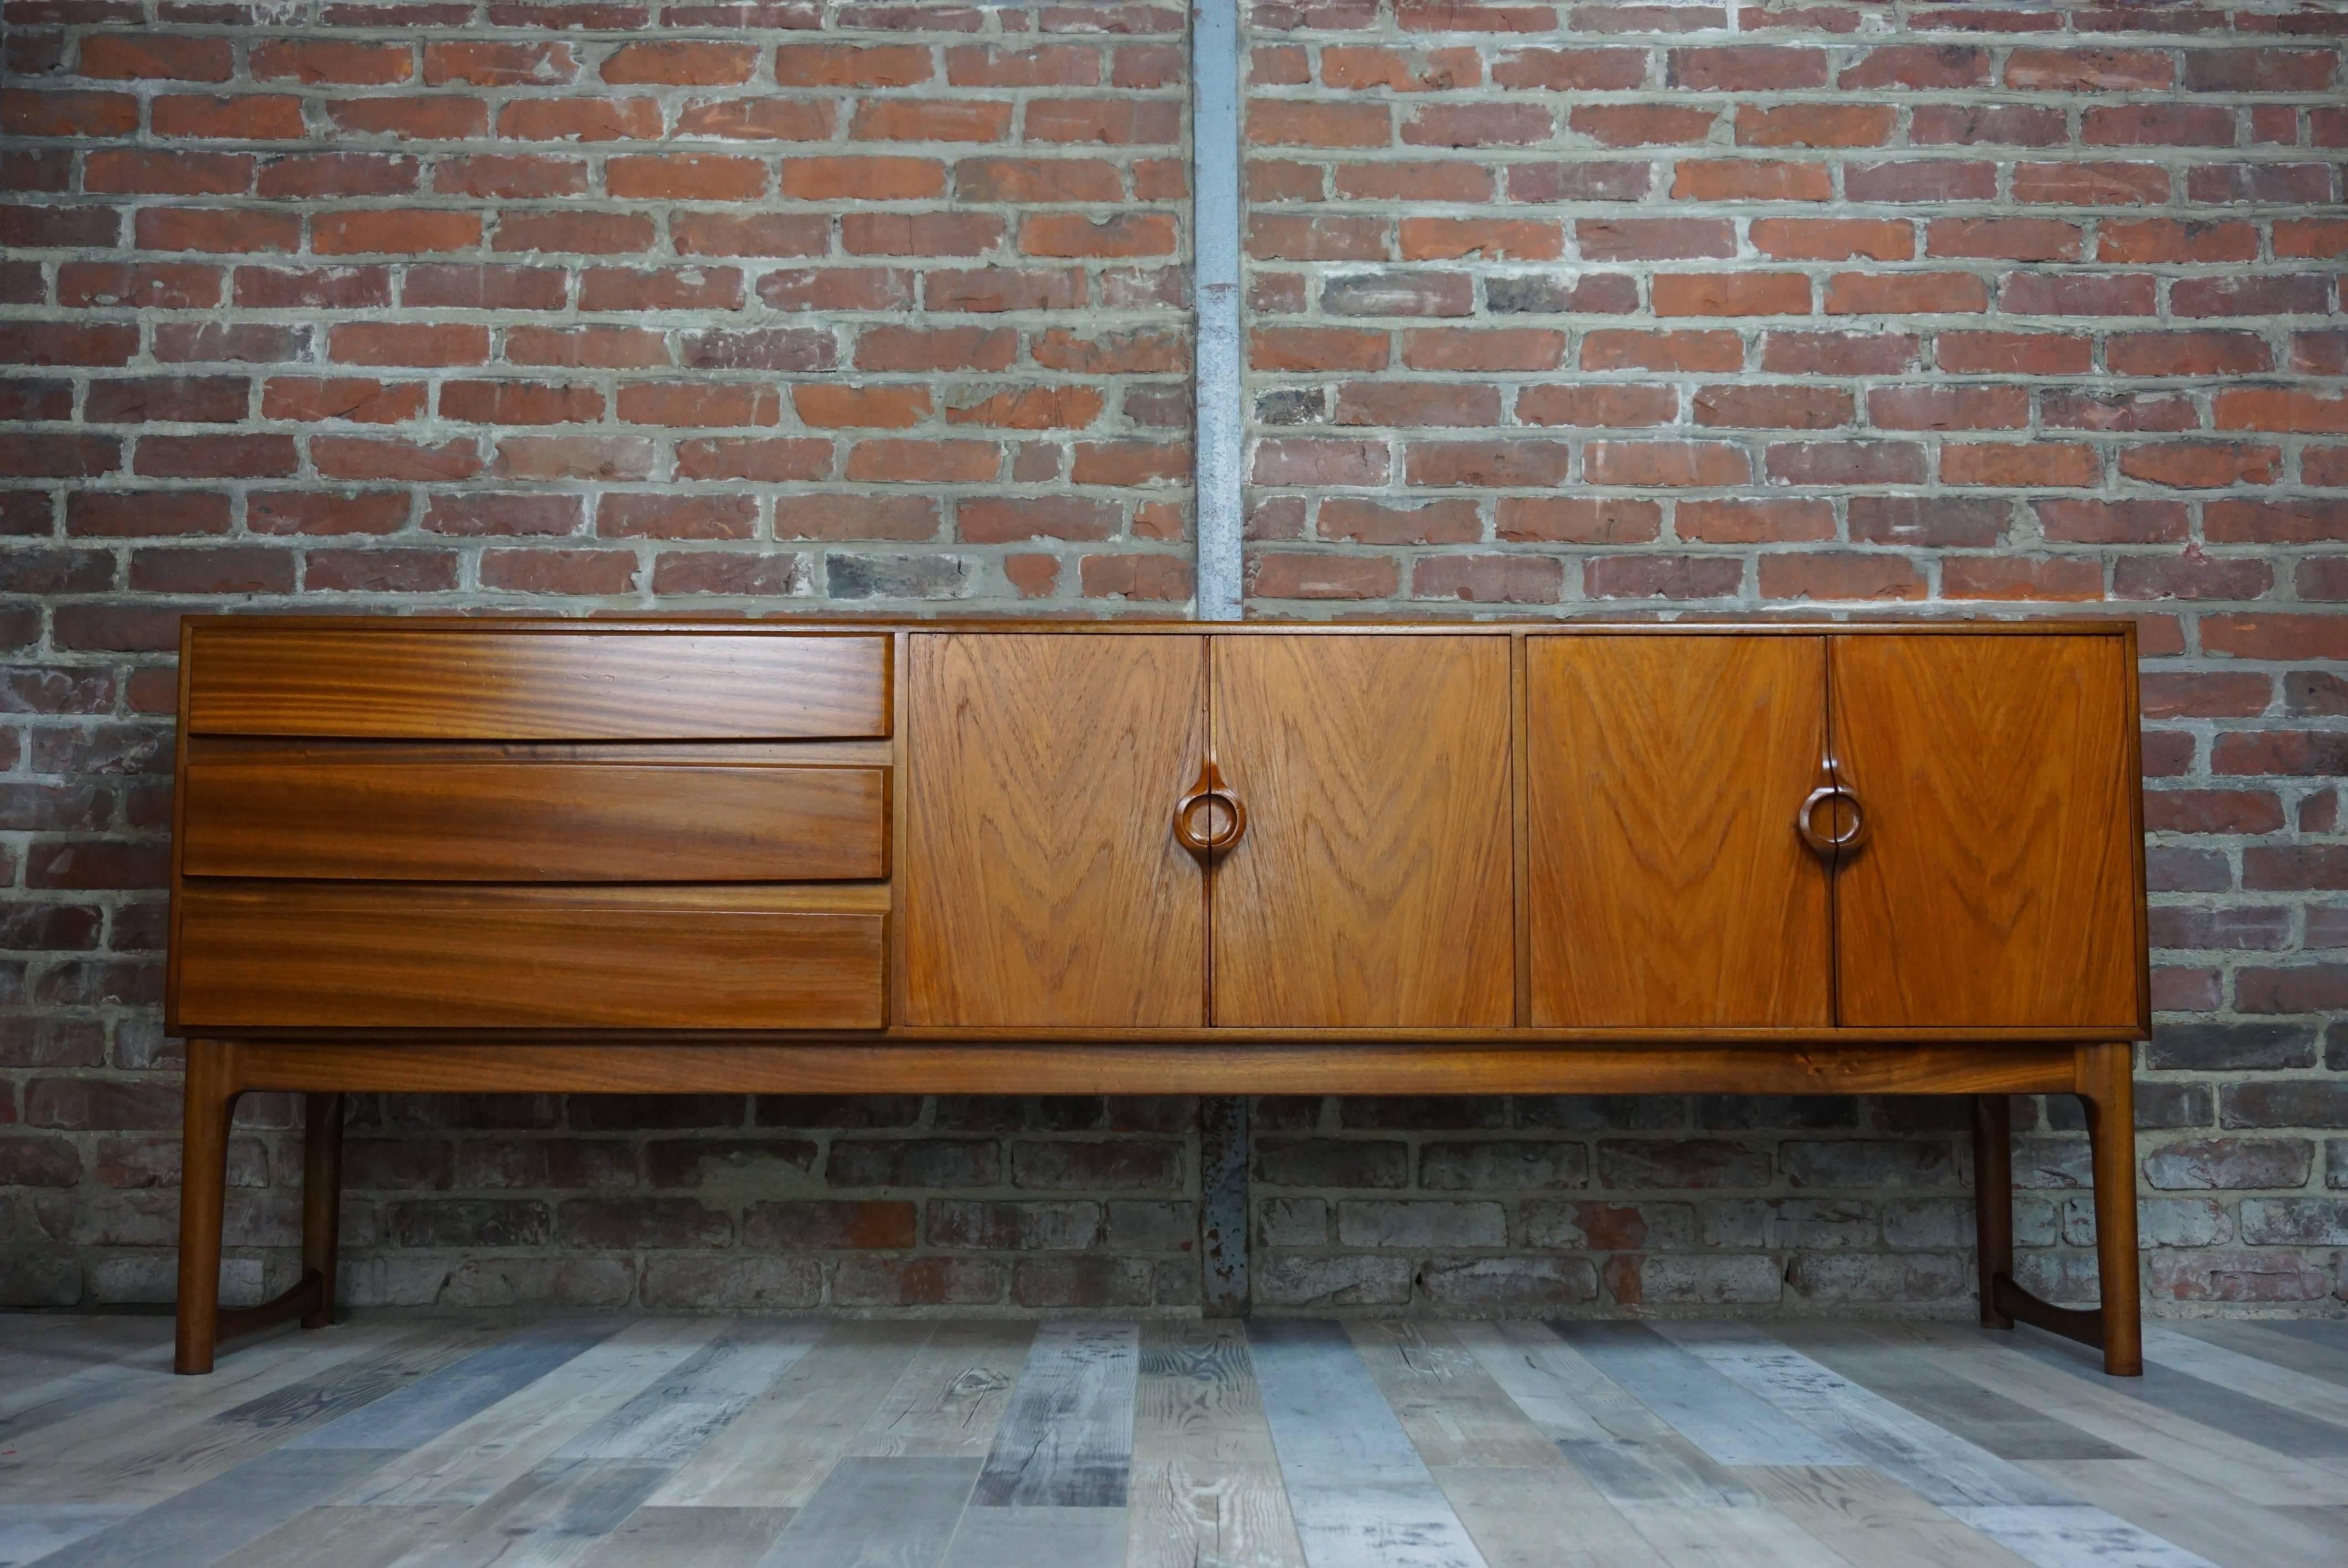 Scandinavian look indisputable for this sideboard of the 1960s (1968 exactly) resolutely modern at the same time. This unusual McIntosh (stamped) credenza has a teak structure, a U-shaped base, sculpted button-shaped handles, three profiled drawers